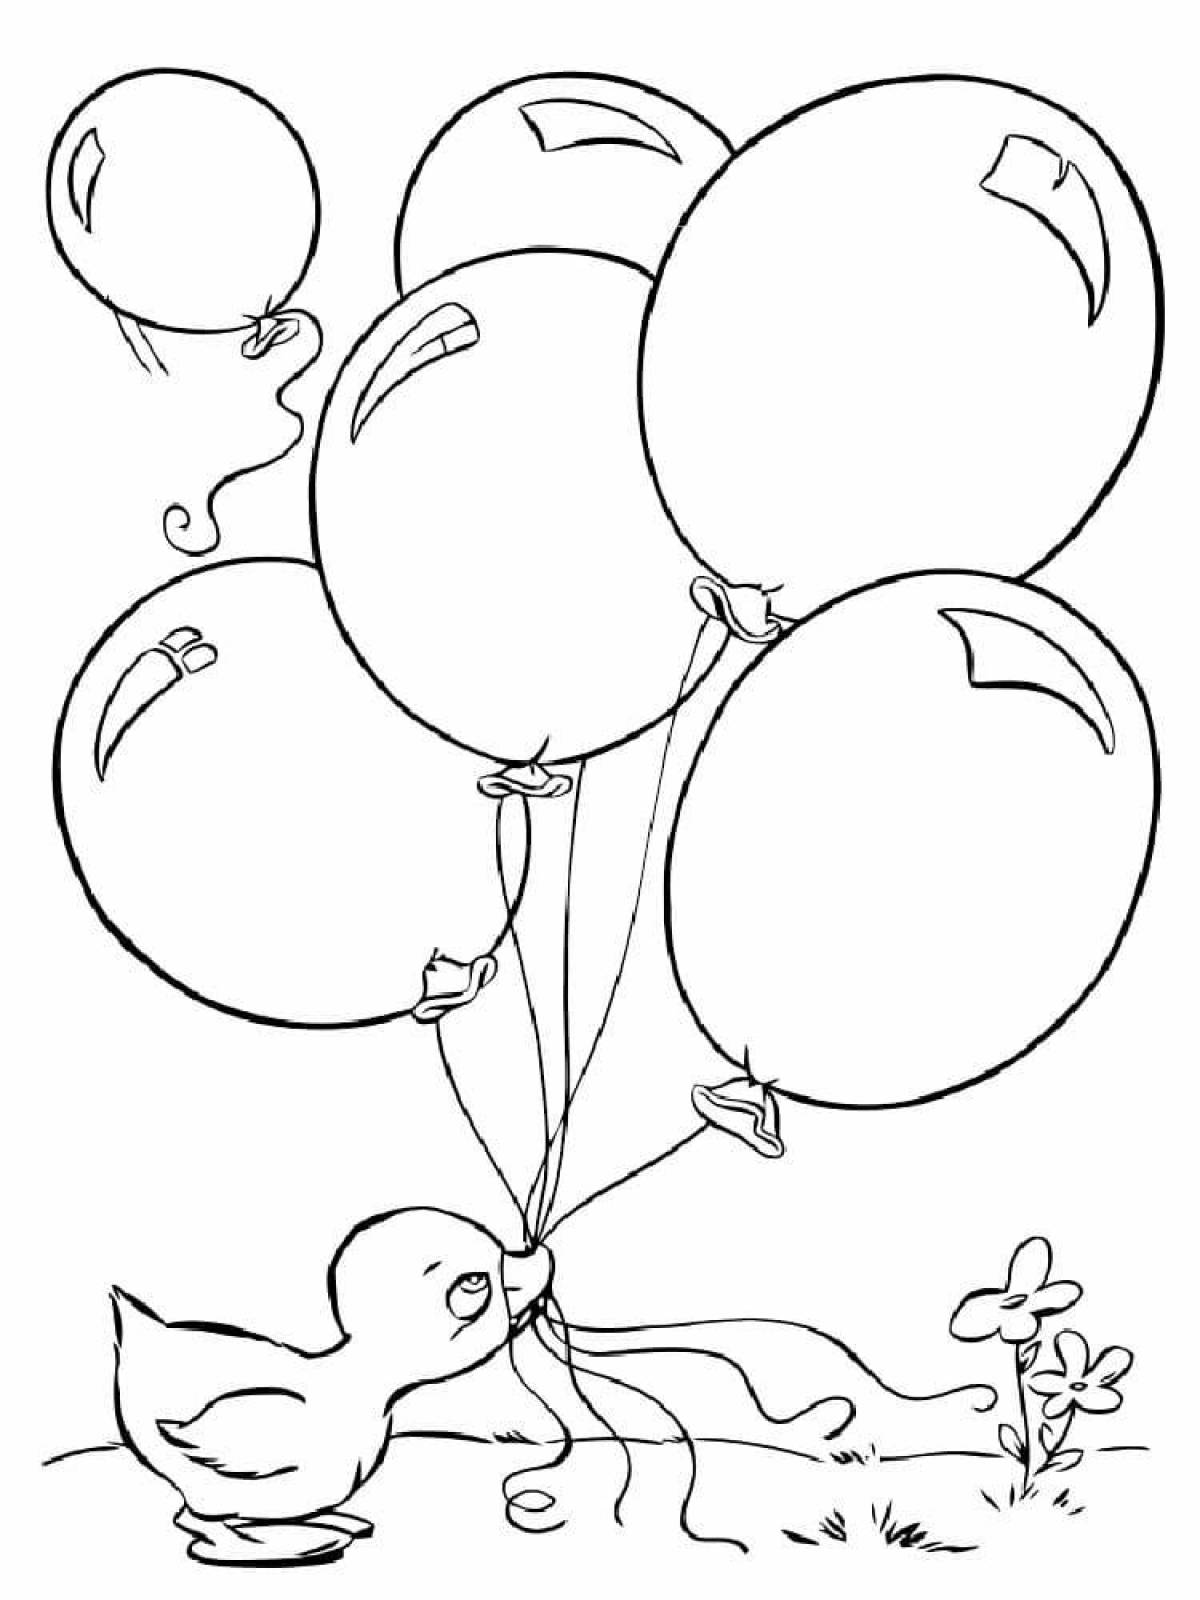 Colored shiny balloons coloring book